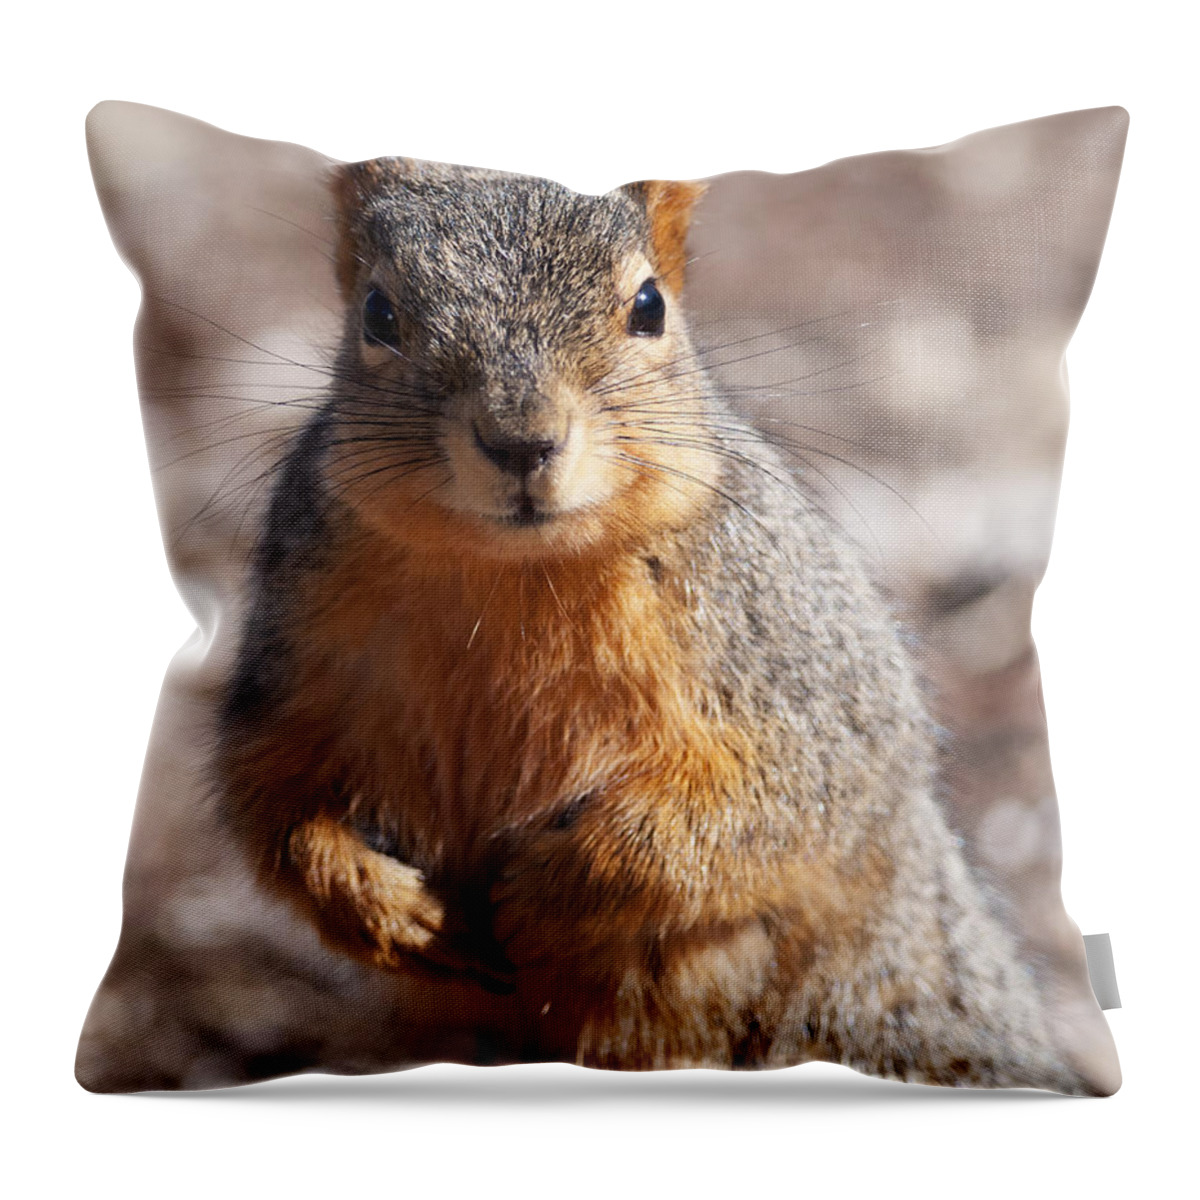 Squirrel Throw Pillow featuring the photograph Squirrel by Art Whitton